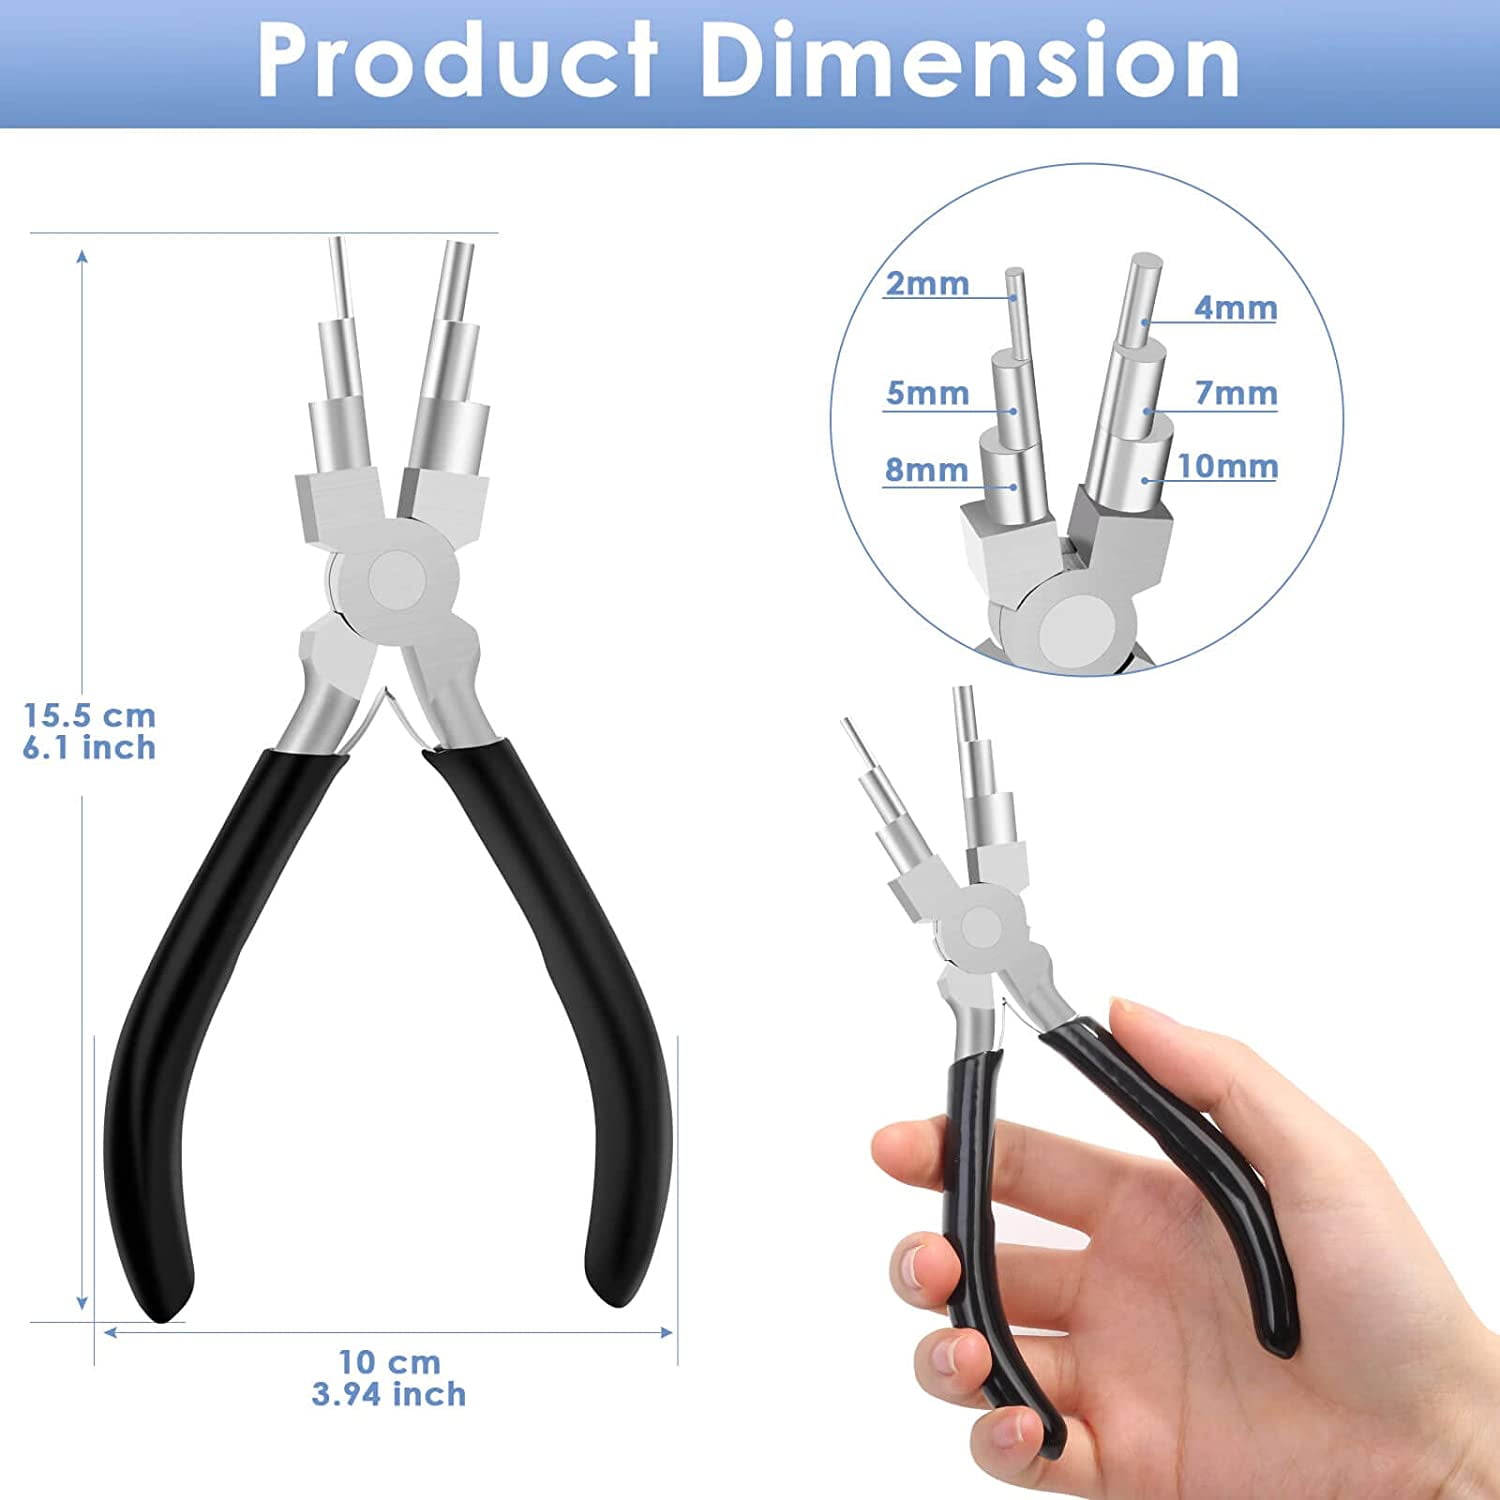 Which Looping Pliers Make Better Bails - Wire Wrapping with the WrapMaker 